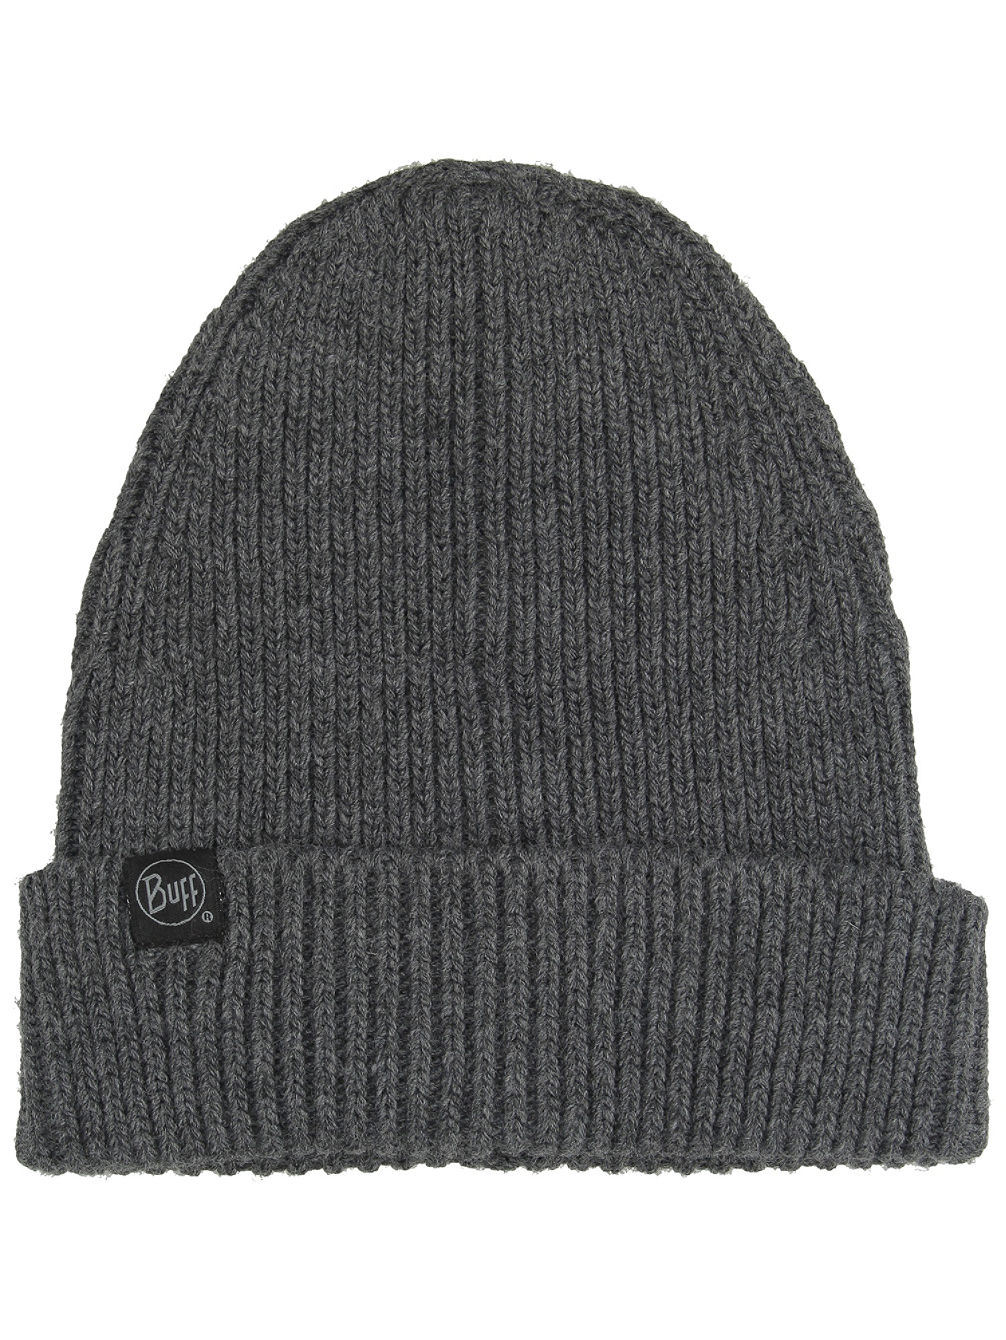 Basic Knitted Pipo